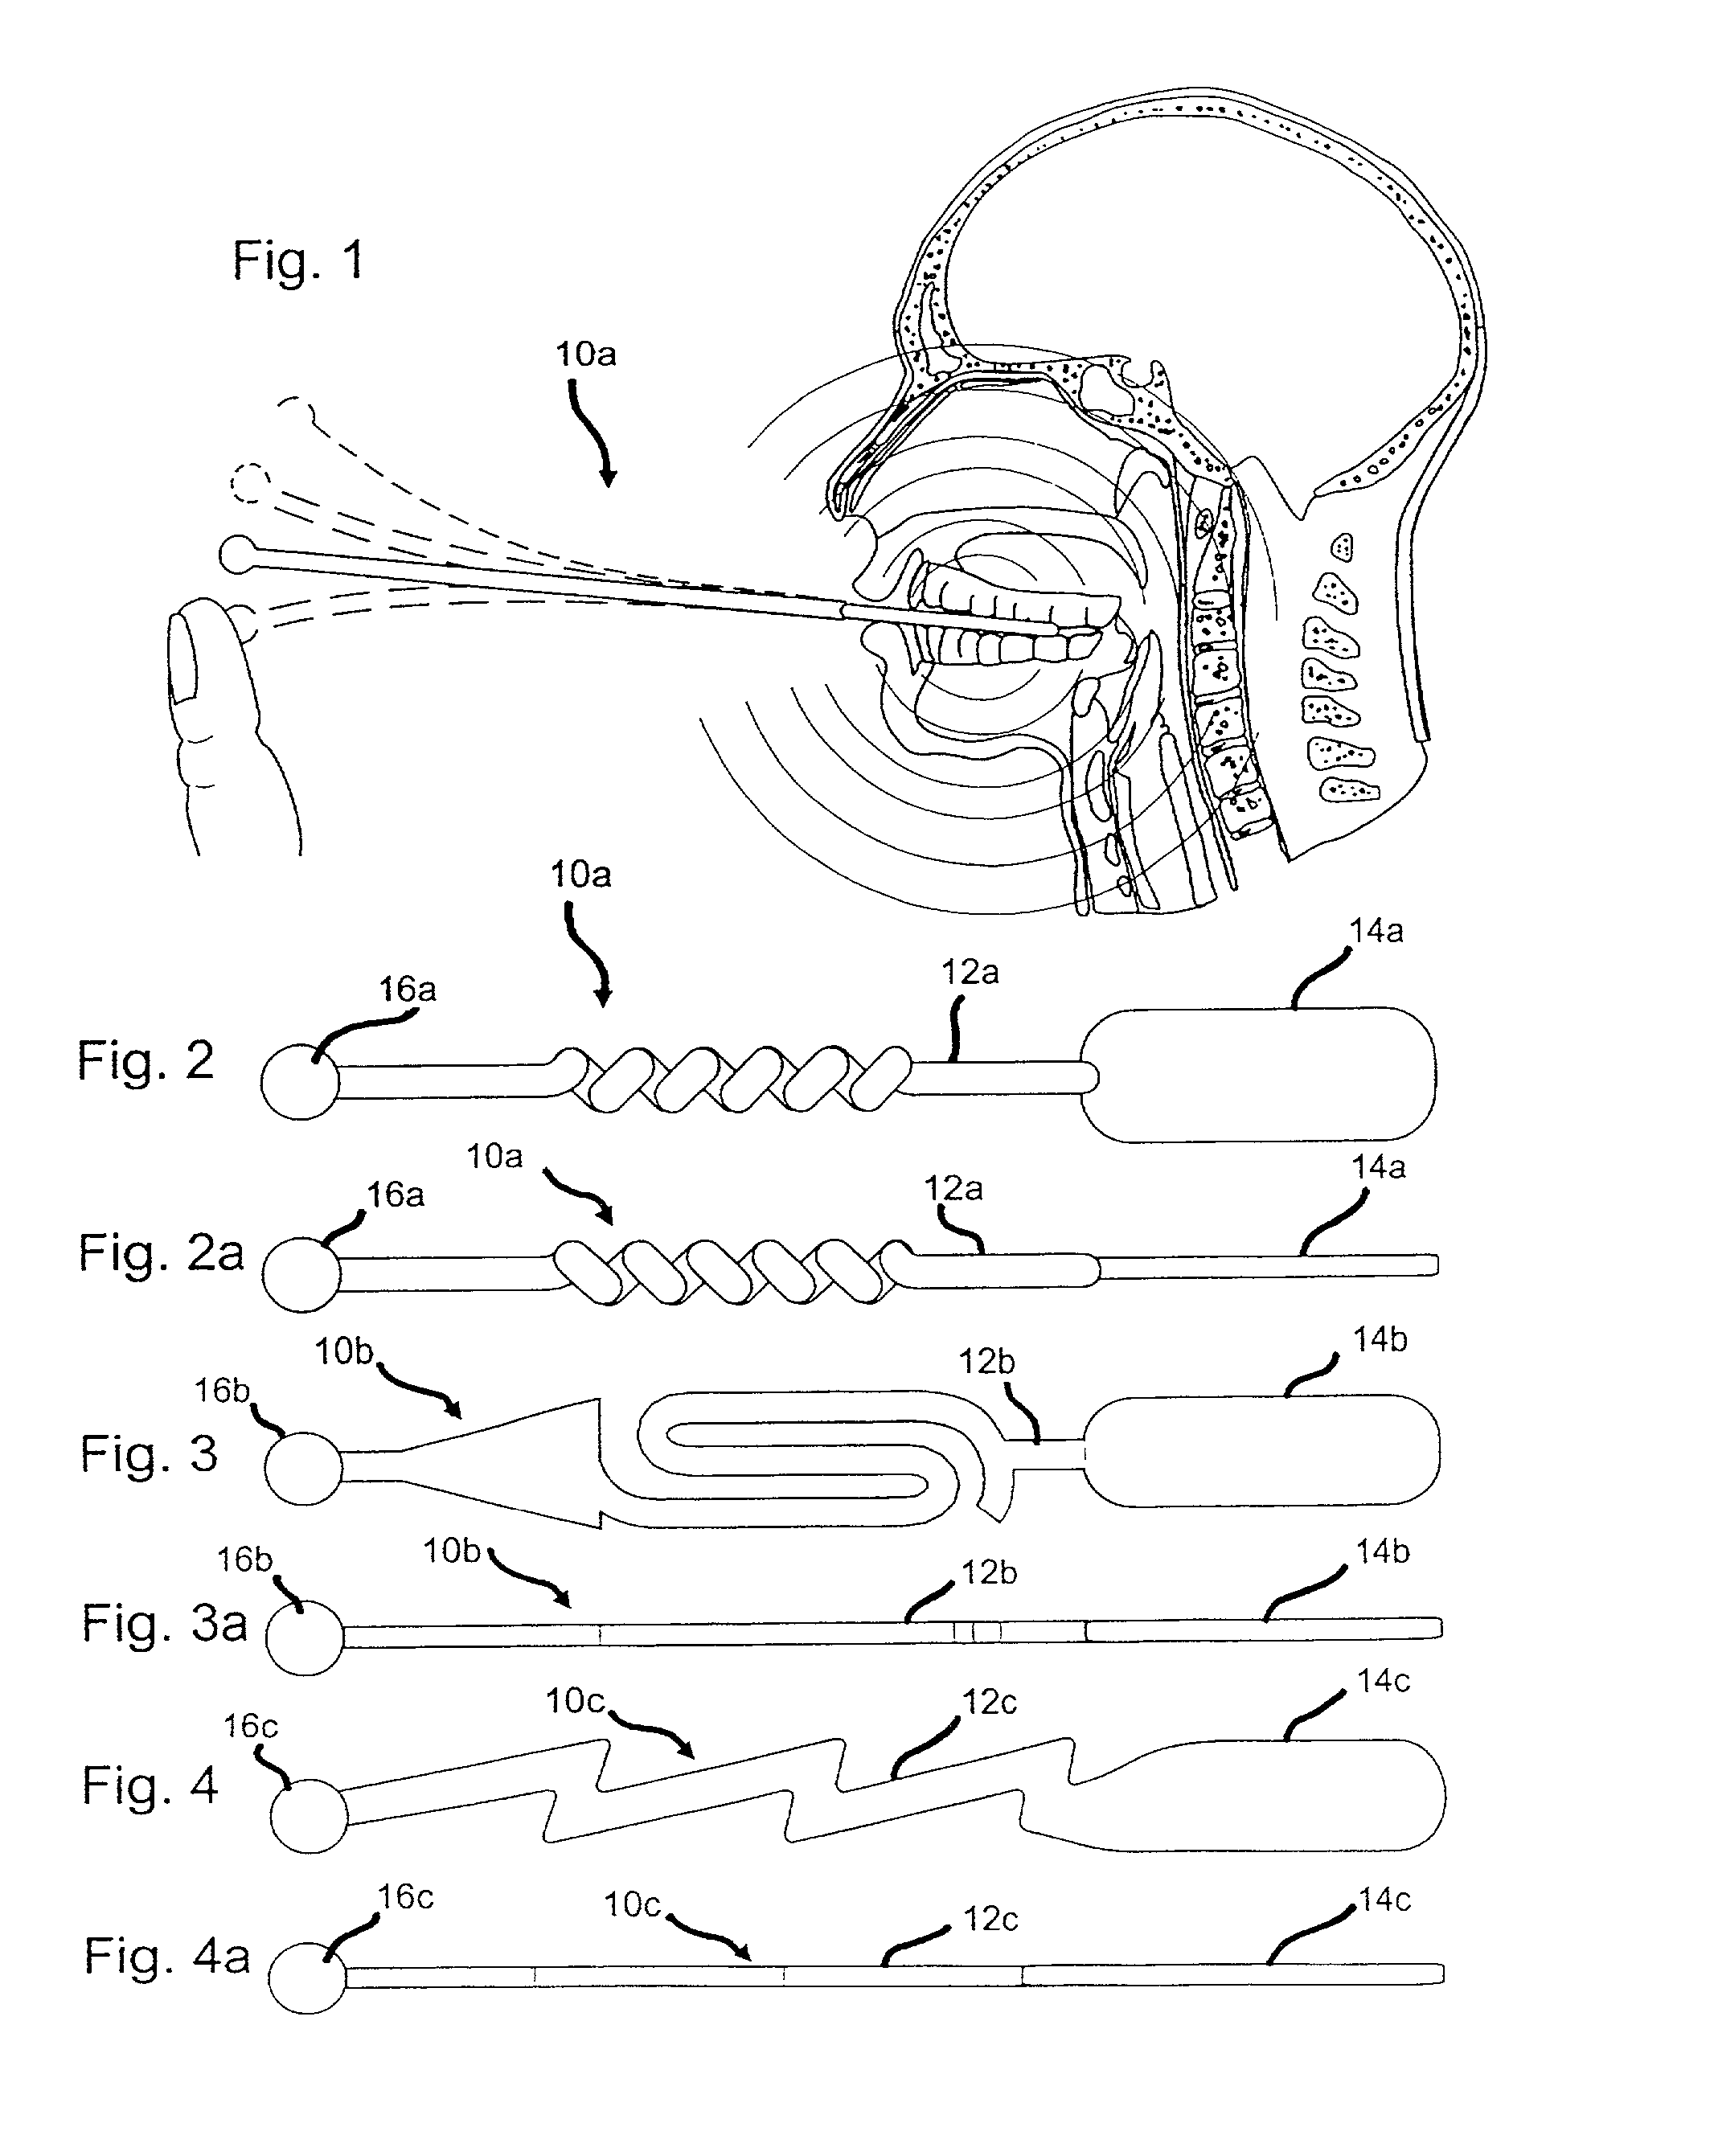 Method and device for treating headaches, sinus congestion and congestion as well as drug withdrawal